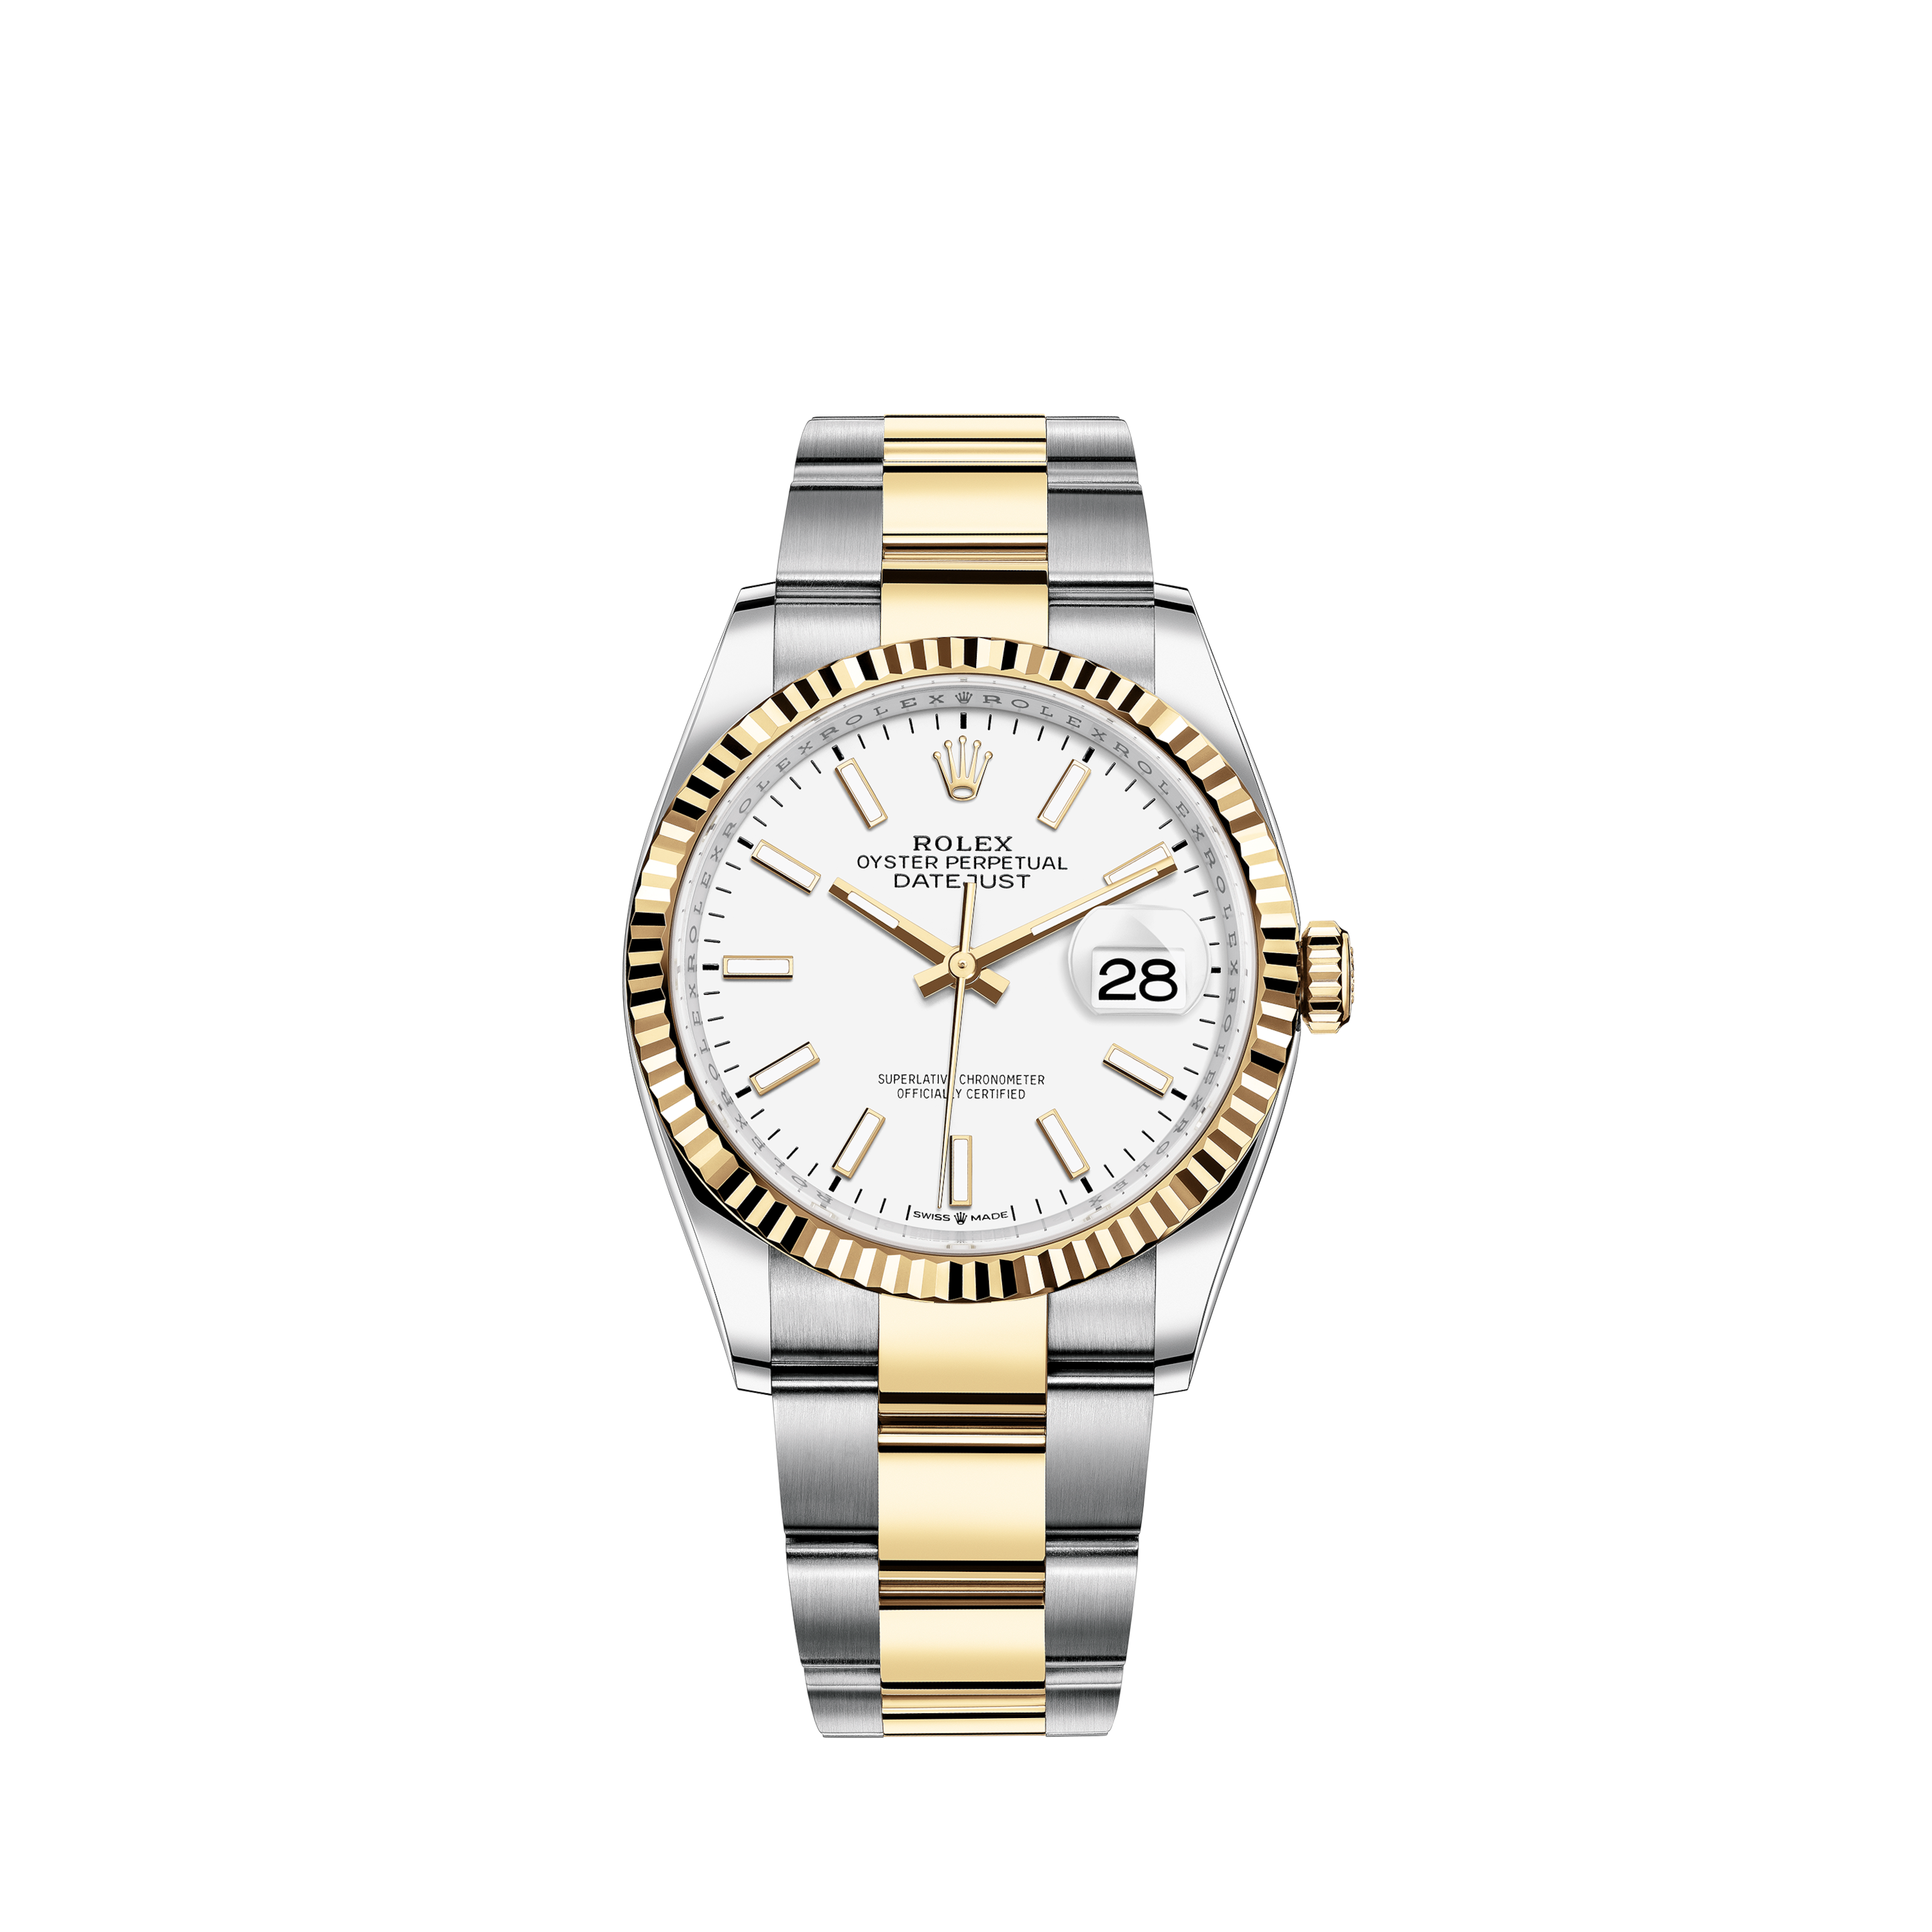 Rolex Datejust Rhodium Dial Steel and 18K Yellow Gold Automatic Men's Watch 116203 - 116203